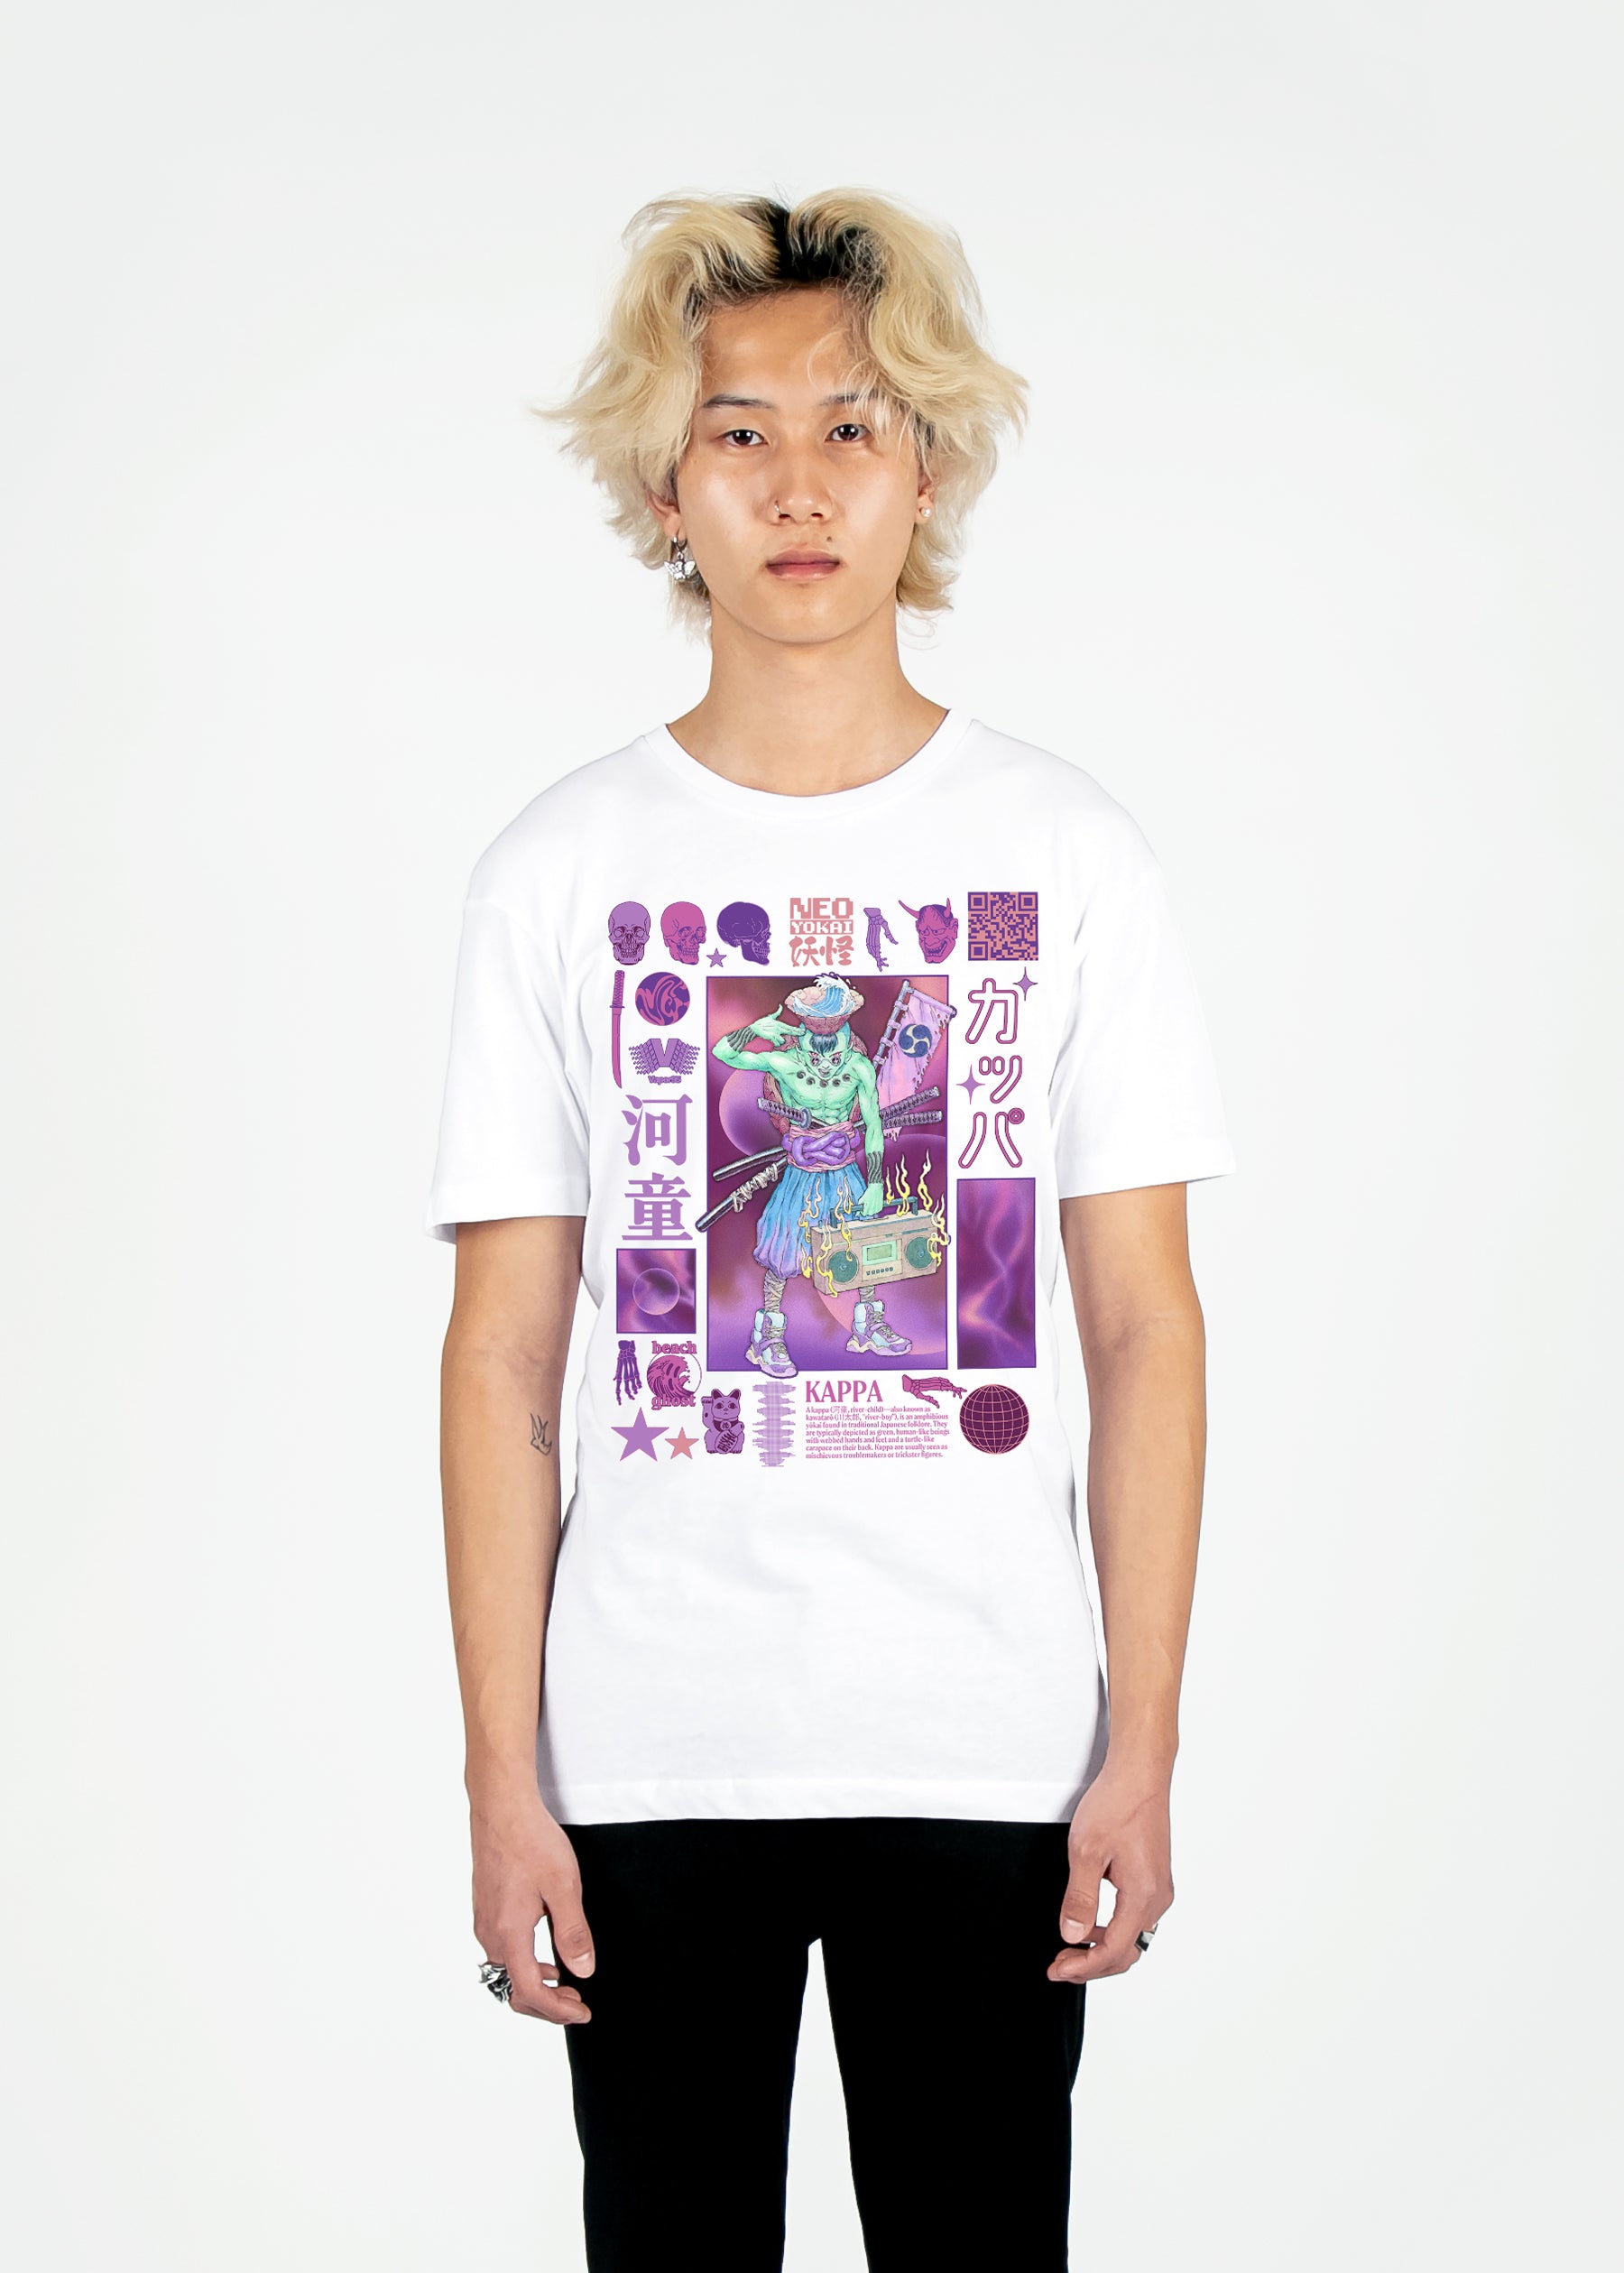 Analytiker forhistorisk Lake Taupo Experience Aesthetic and Vaporwave fashion with Vapor95's Graphic Tees |  Kappa Tee